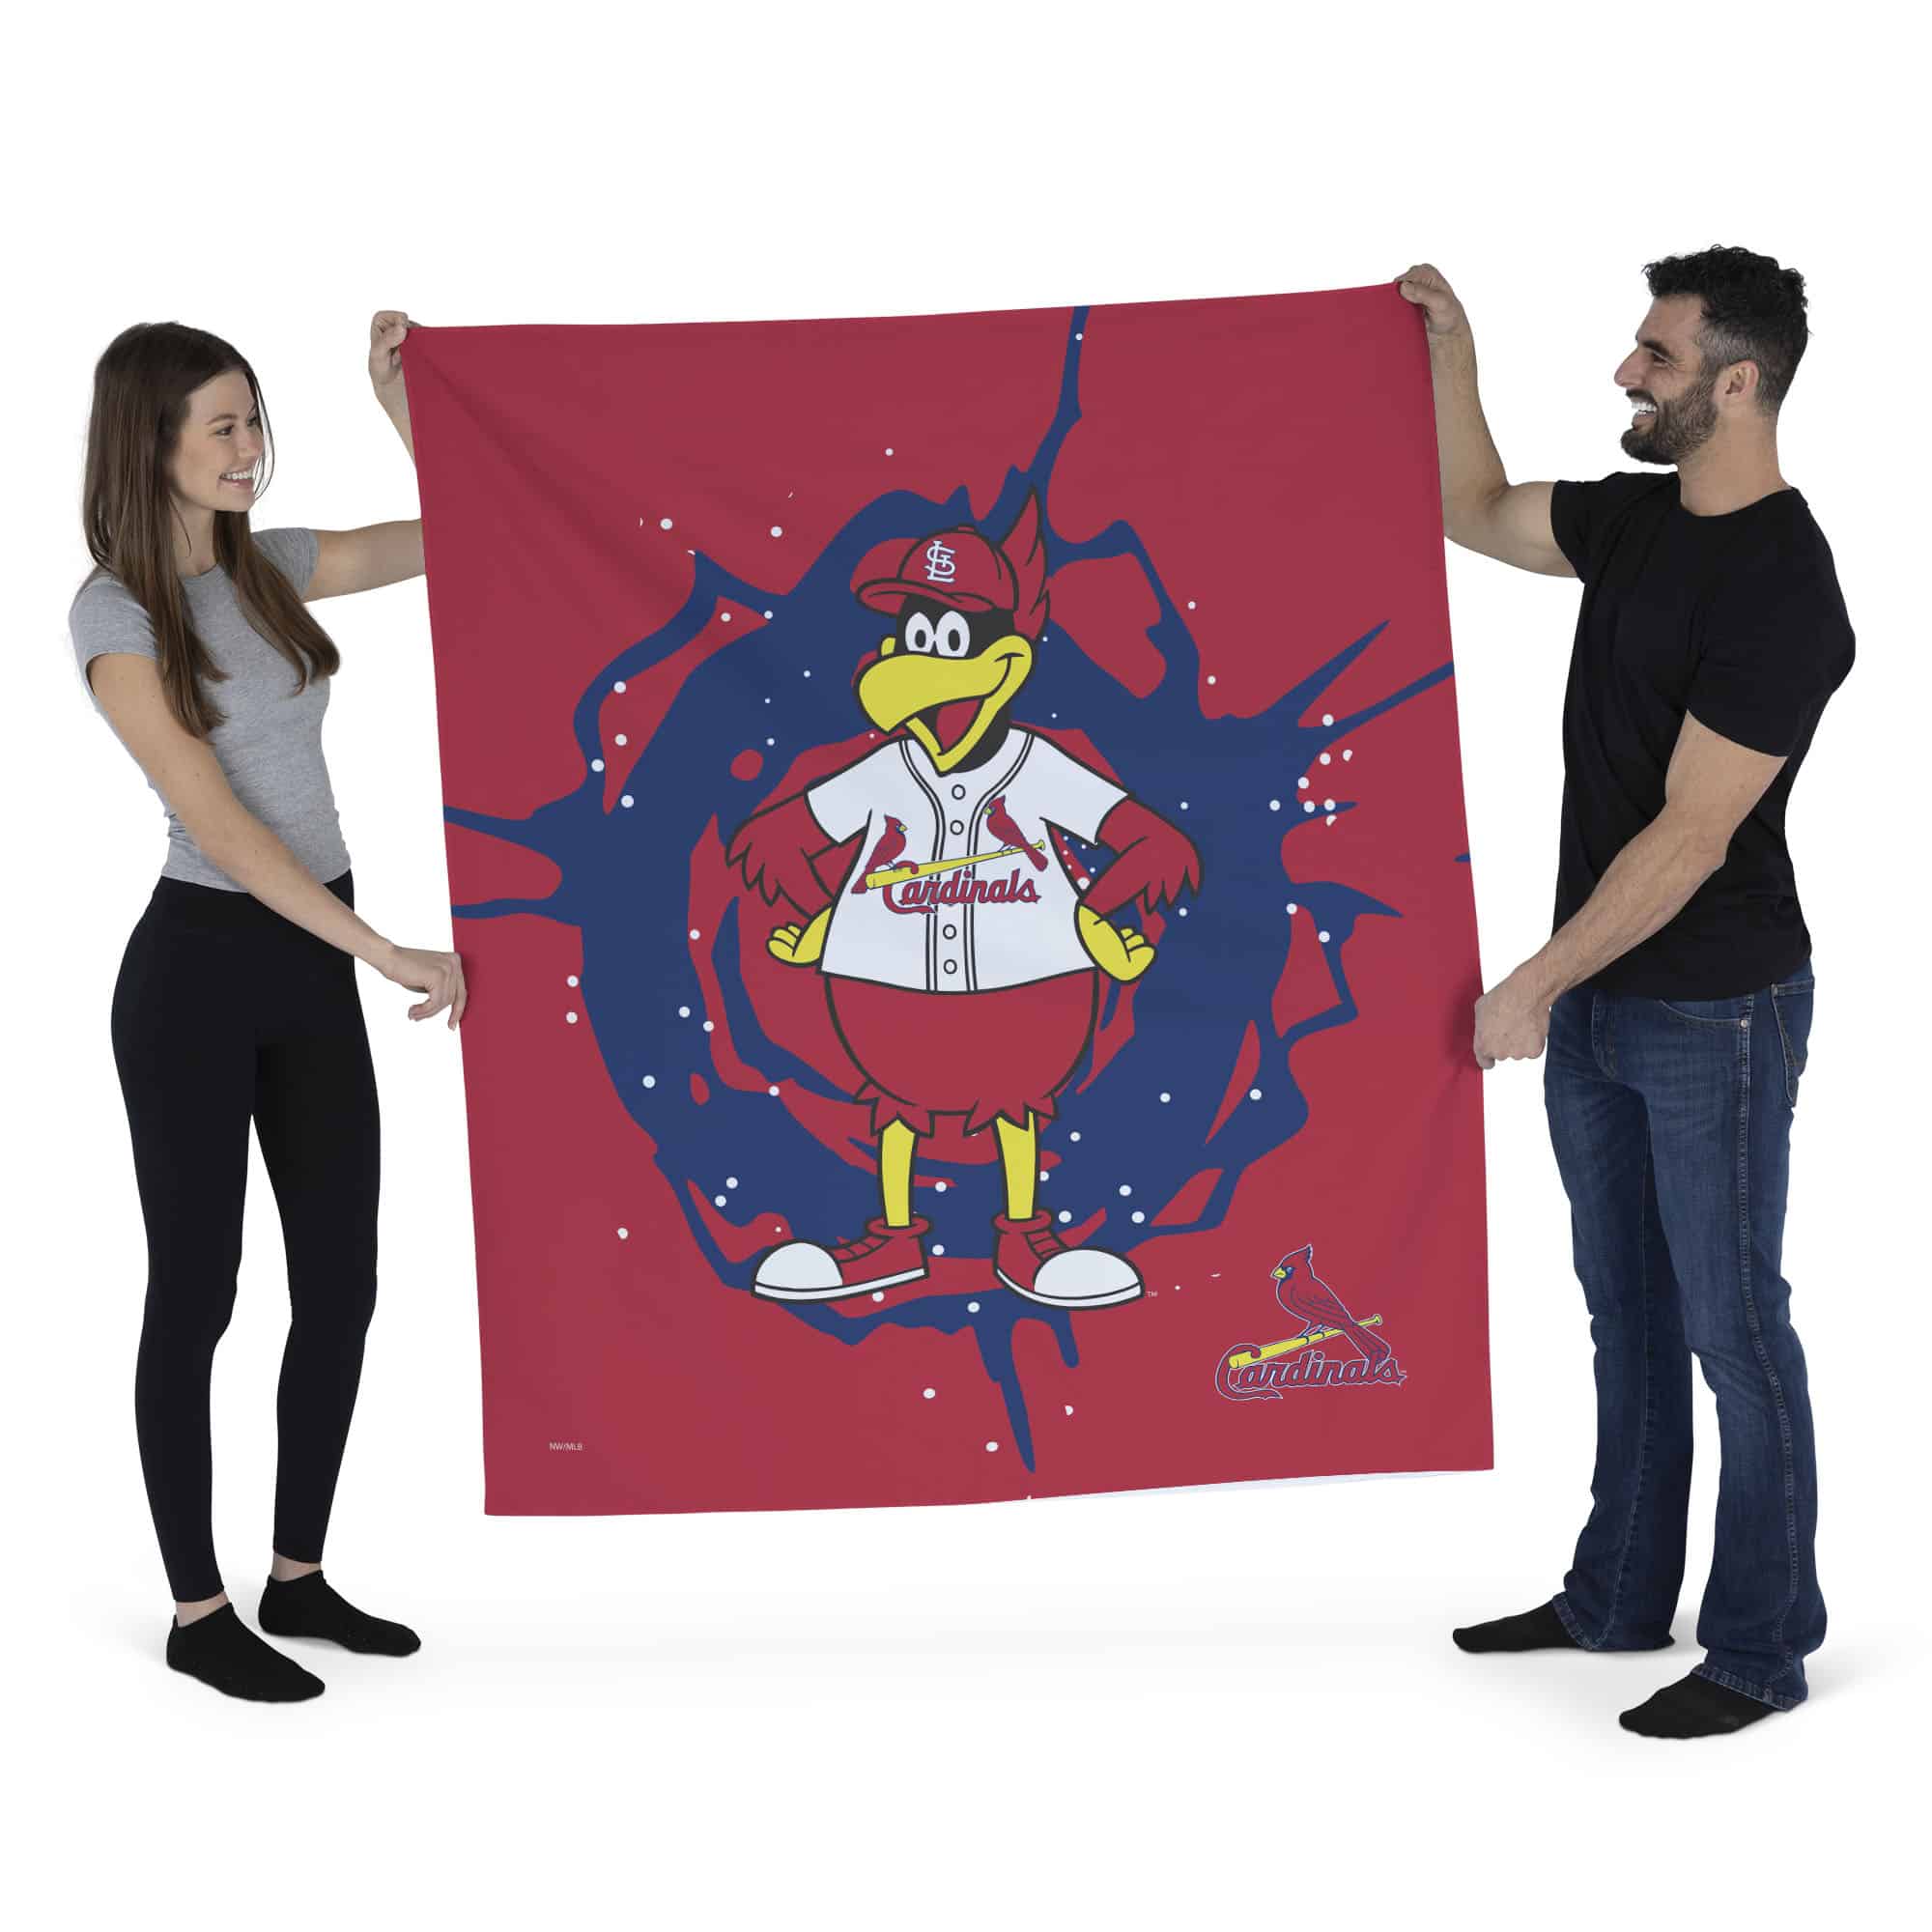 St. Louis Cardinals Mascot Wall Hanging 50x60 Inches